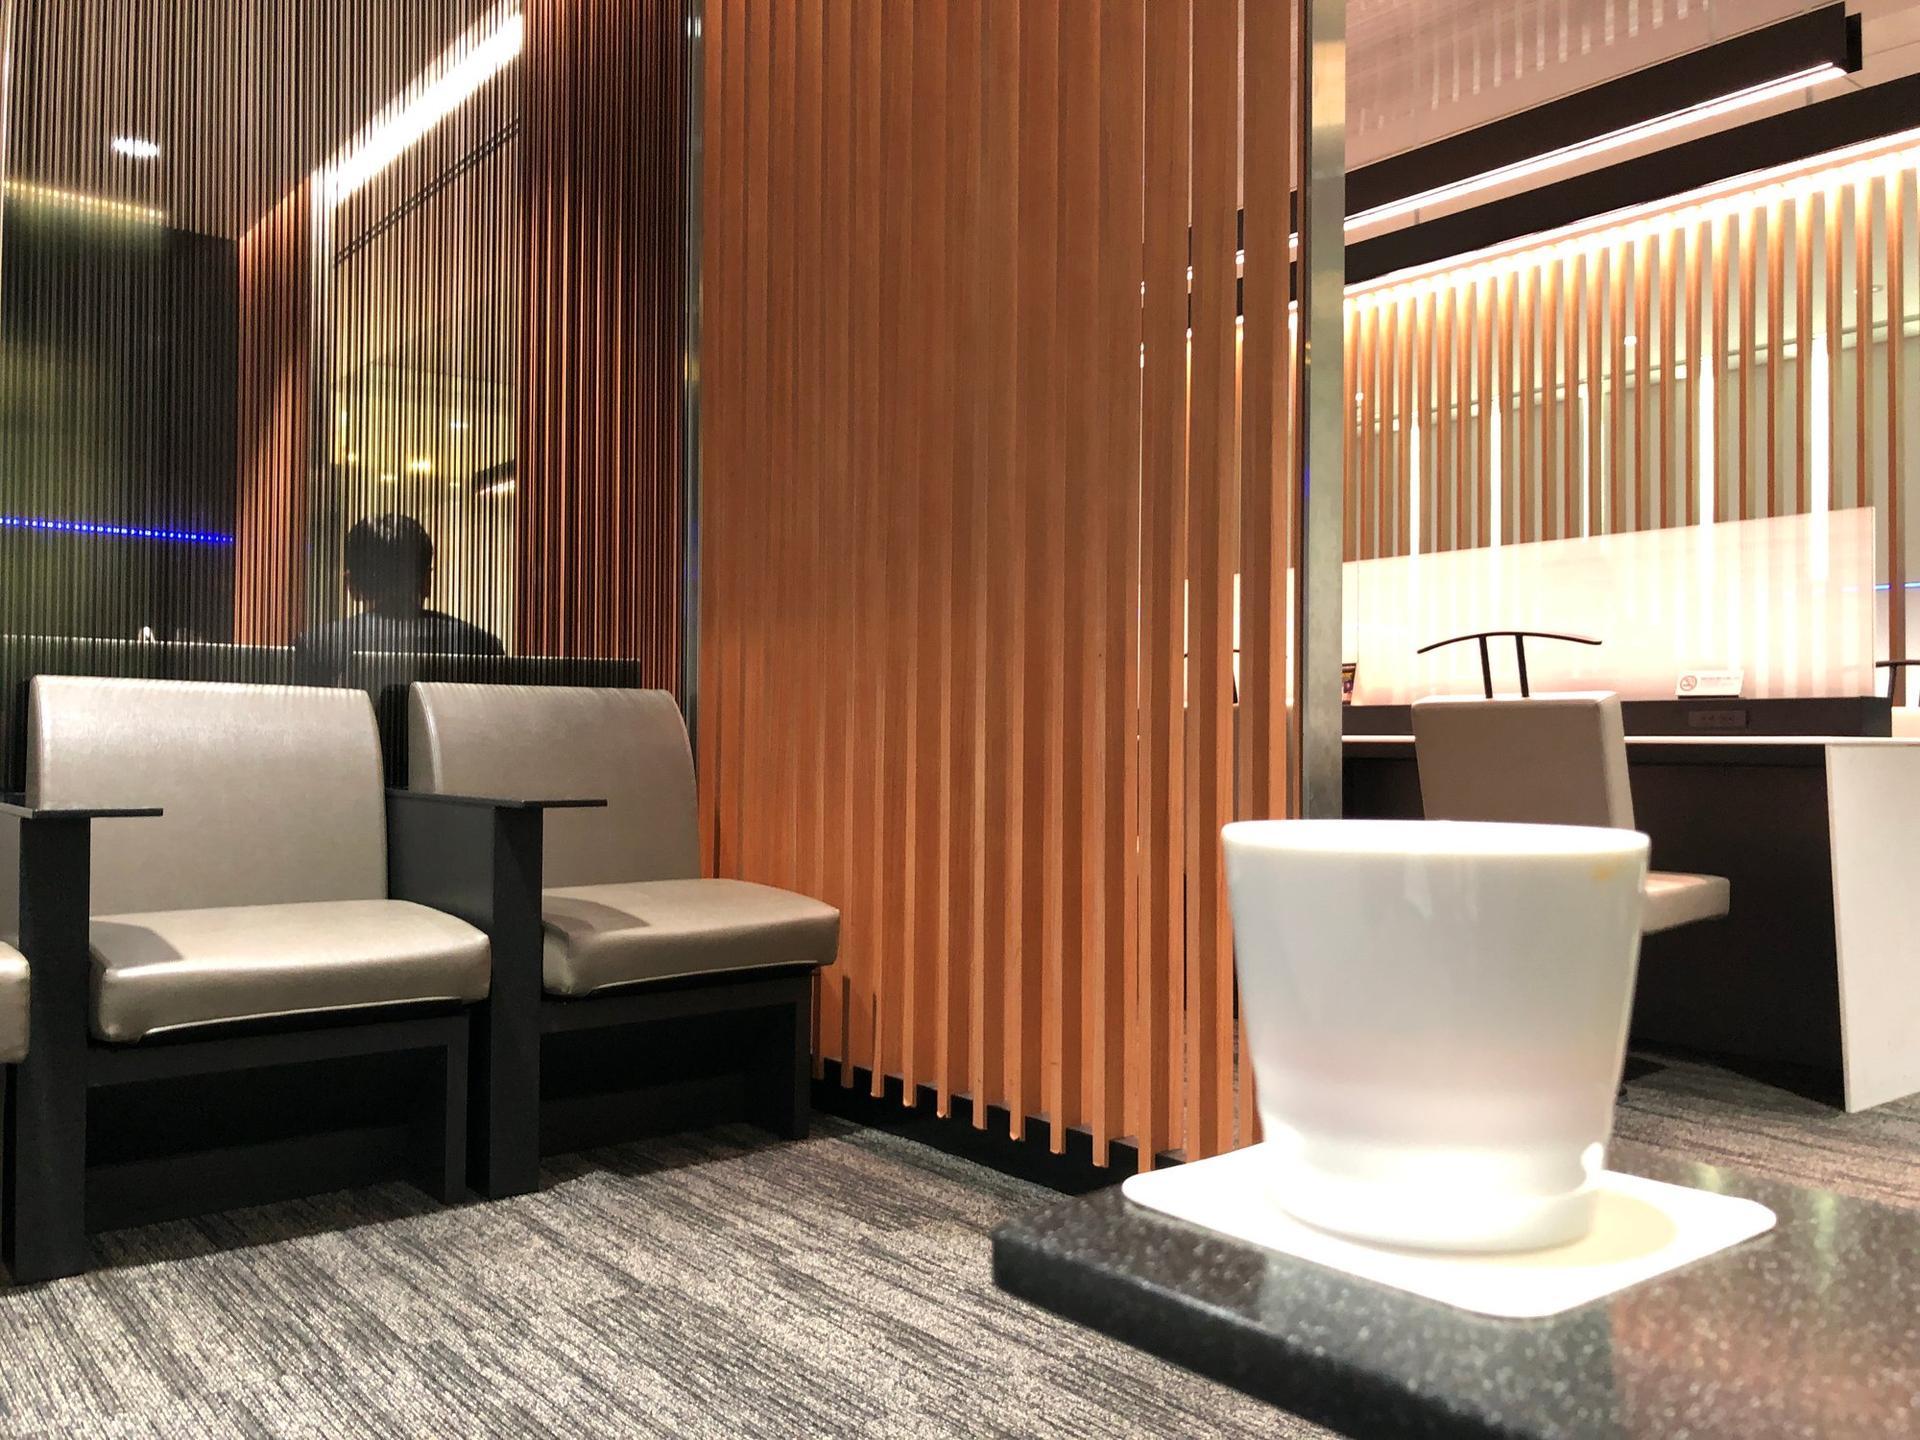 All Nippon Airways ANA Lounge image 9 of 9